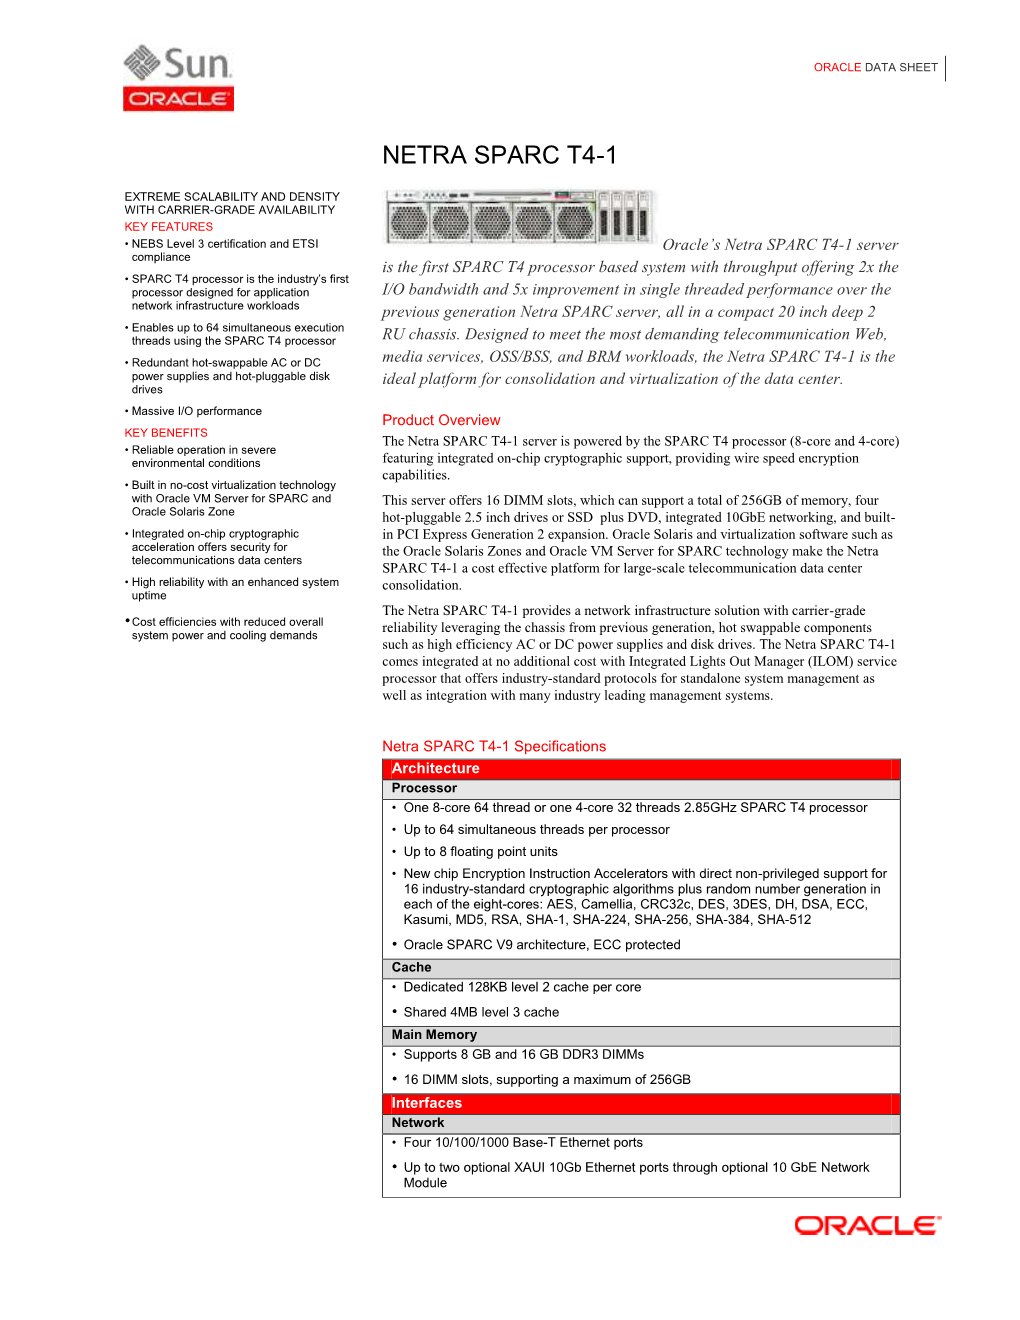 Oracle Netra SPARC T4-1 Data Sheet